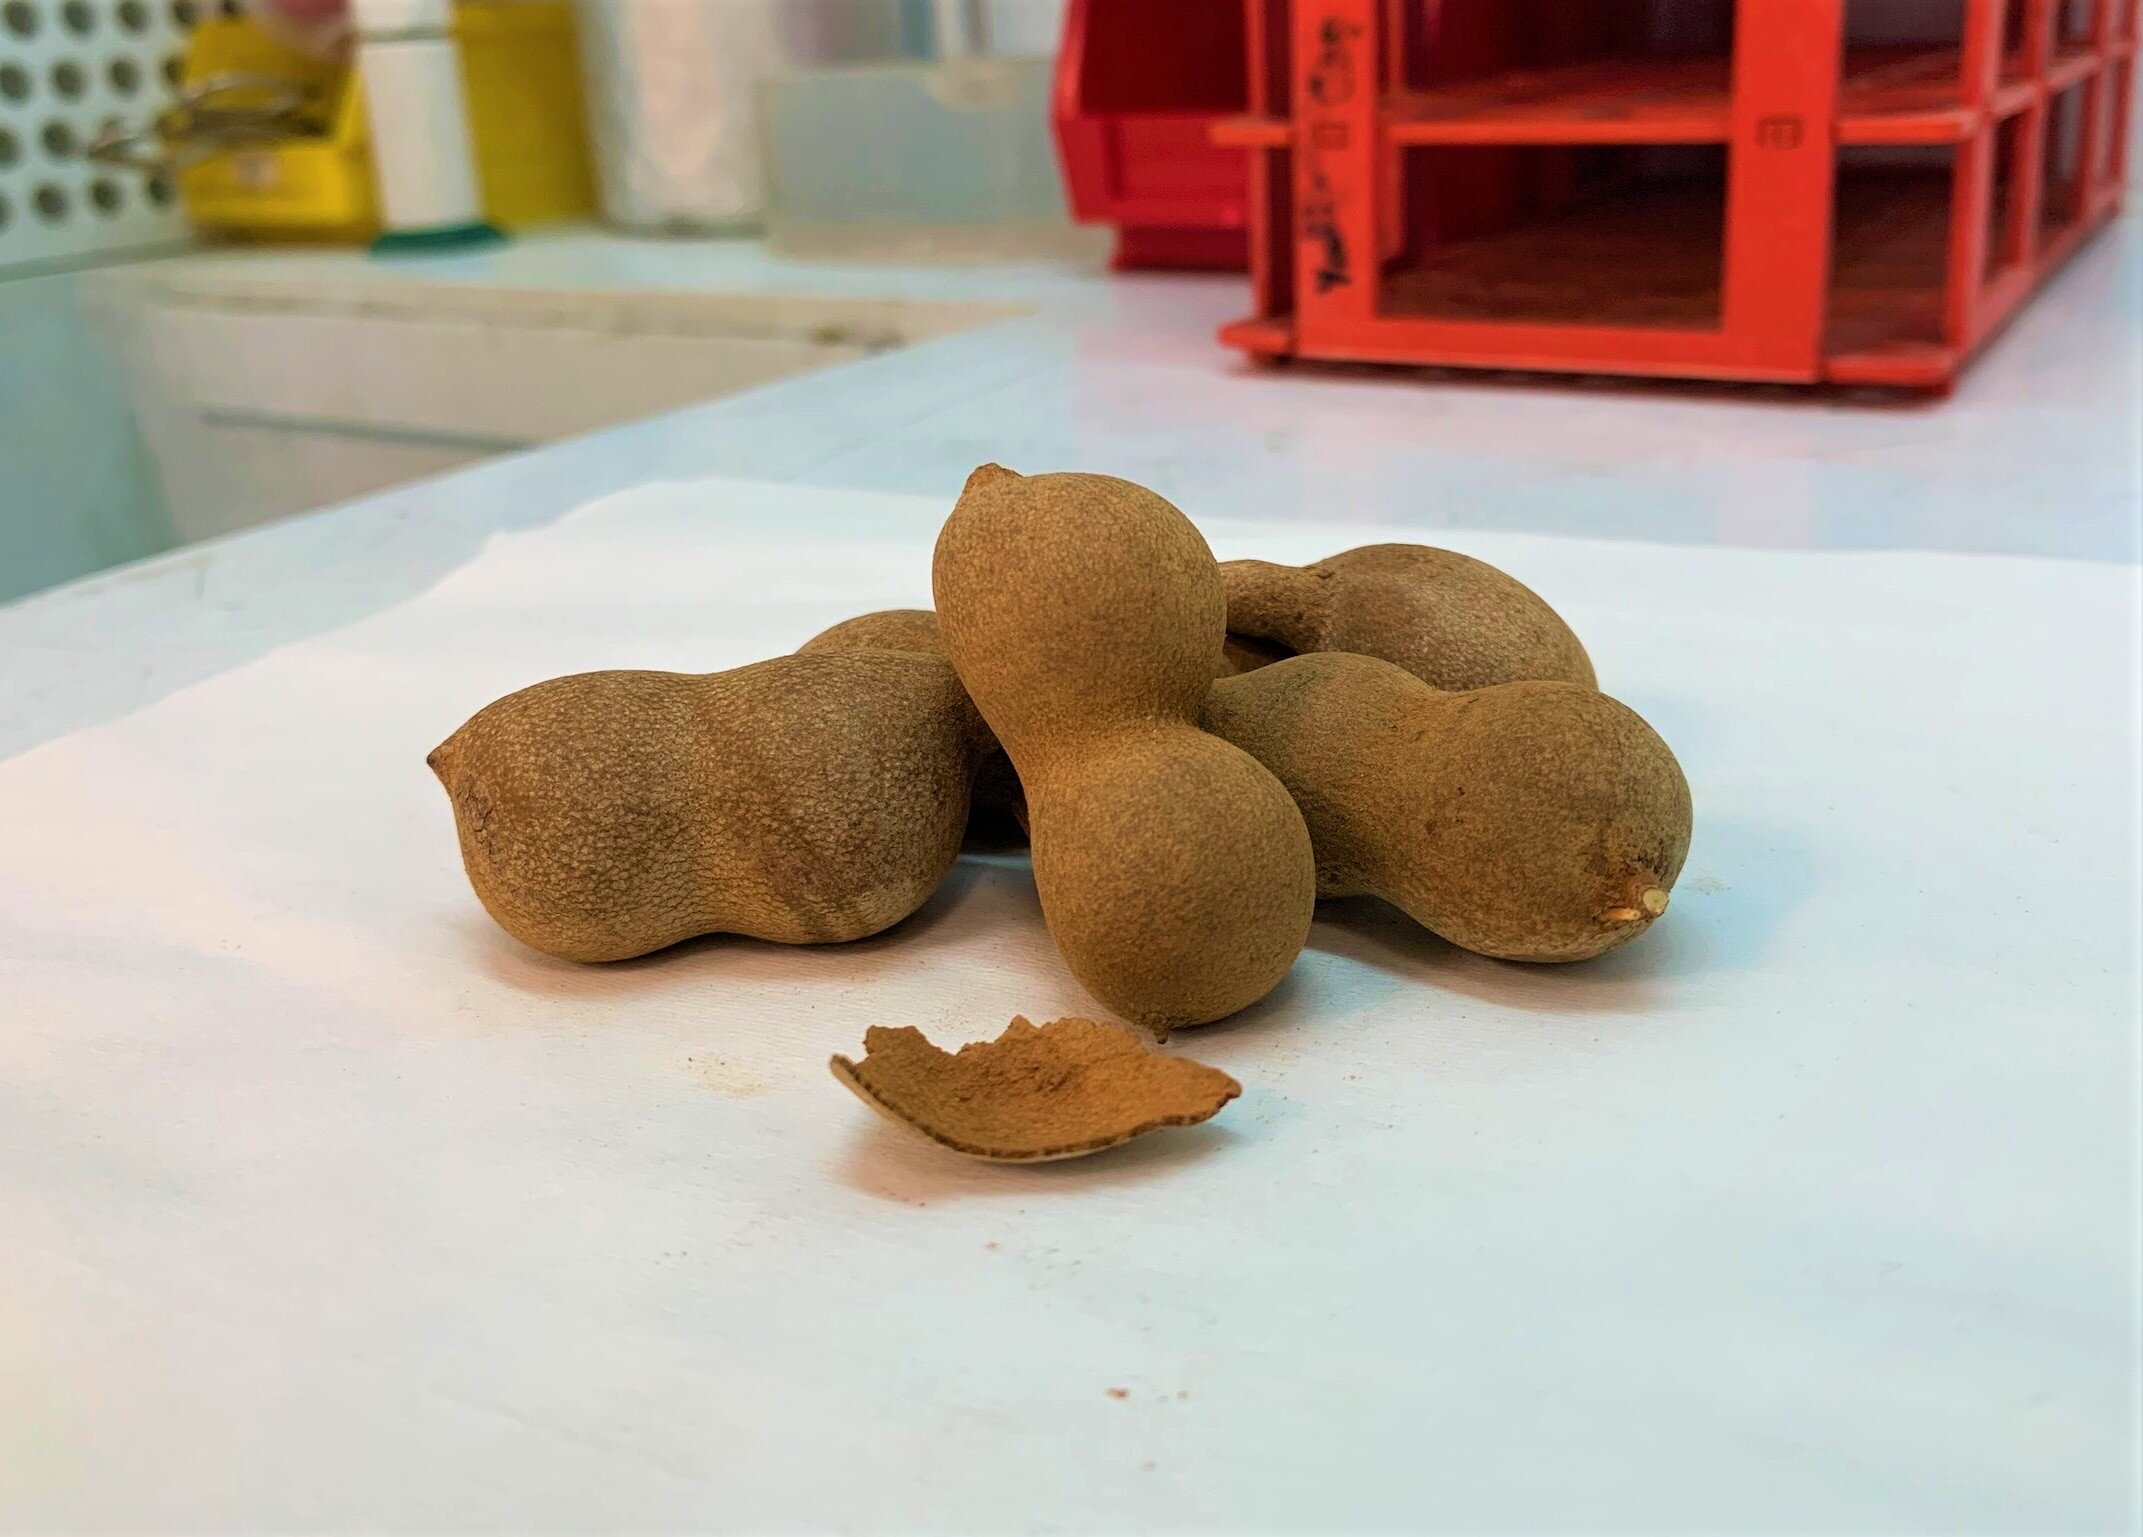 Researchers convert tamarind shells into an energy source for vehicles